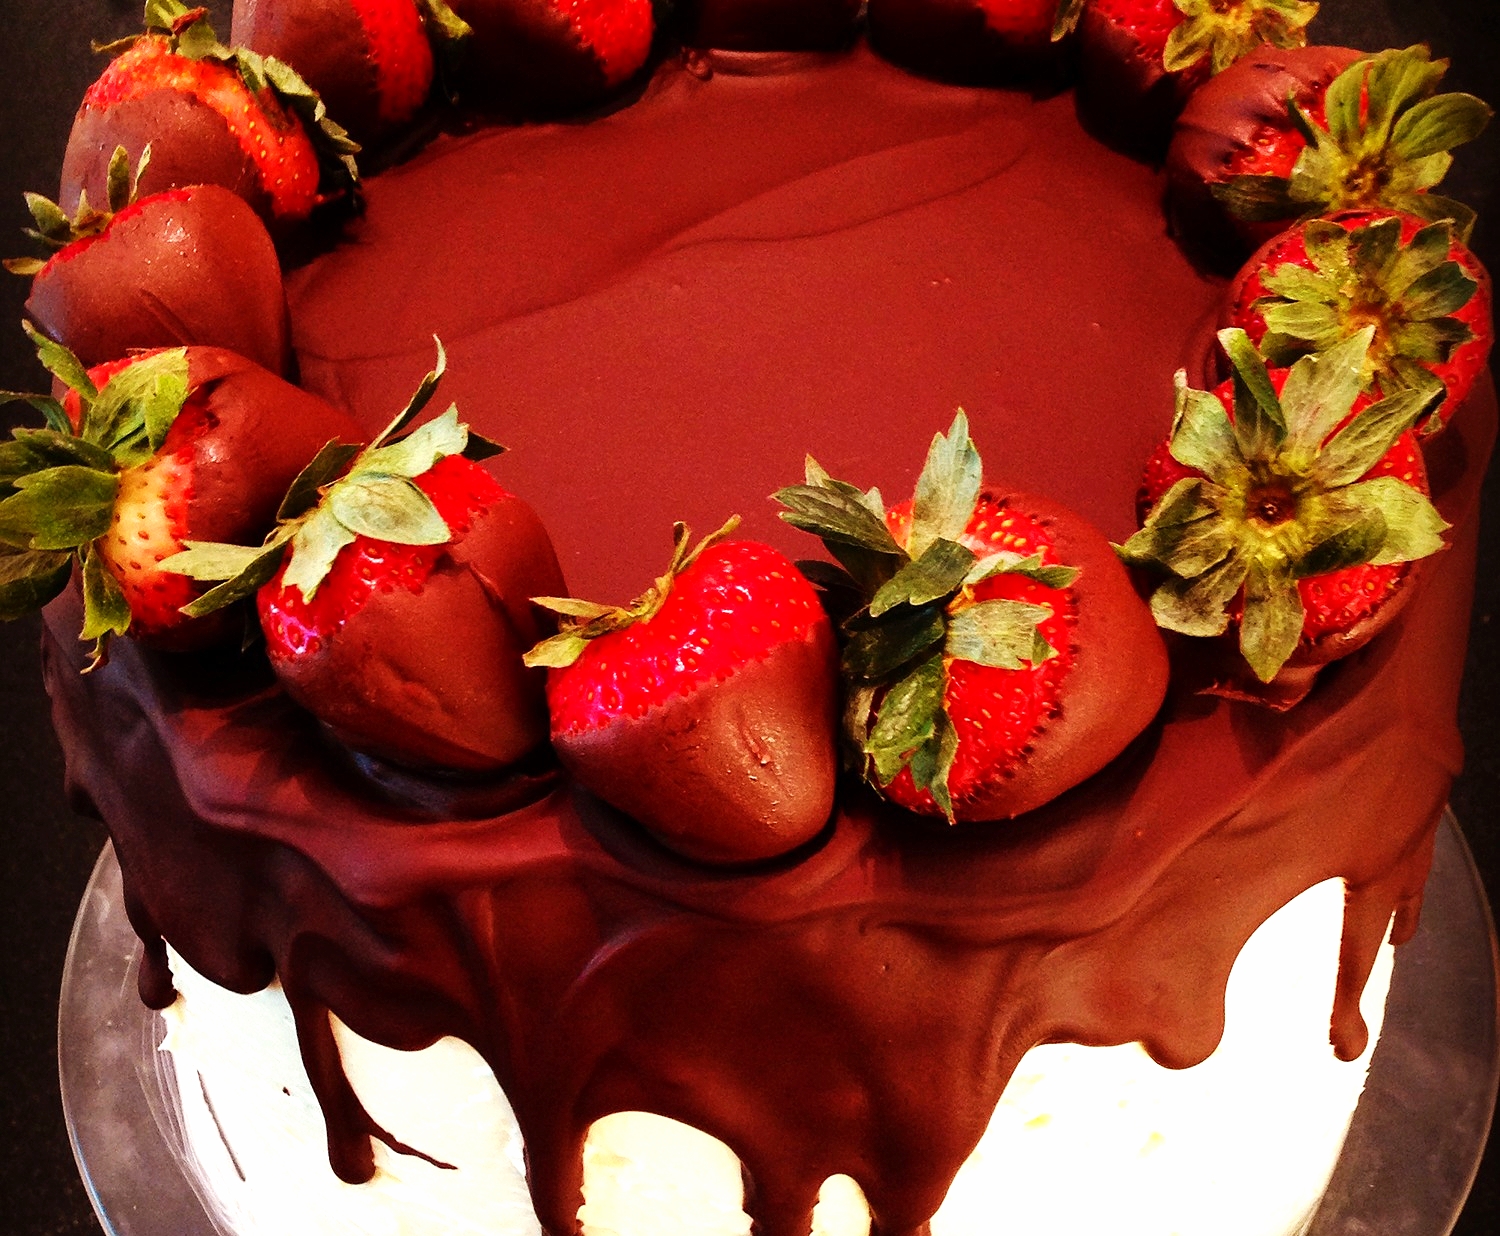 Shadow cake topped with chocolate dipped strawberries